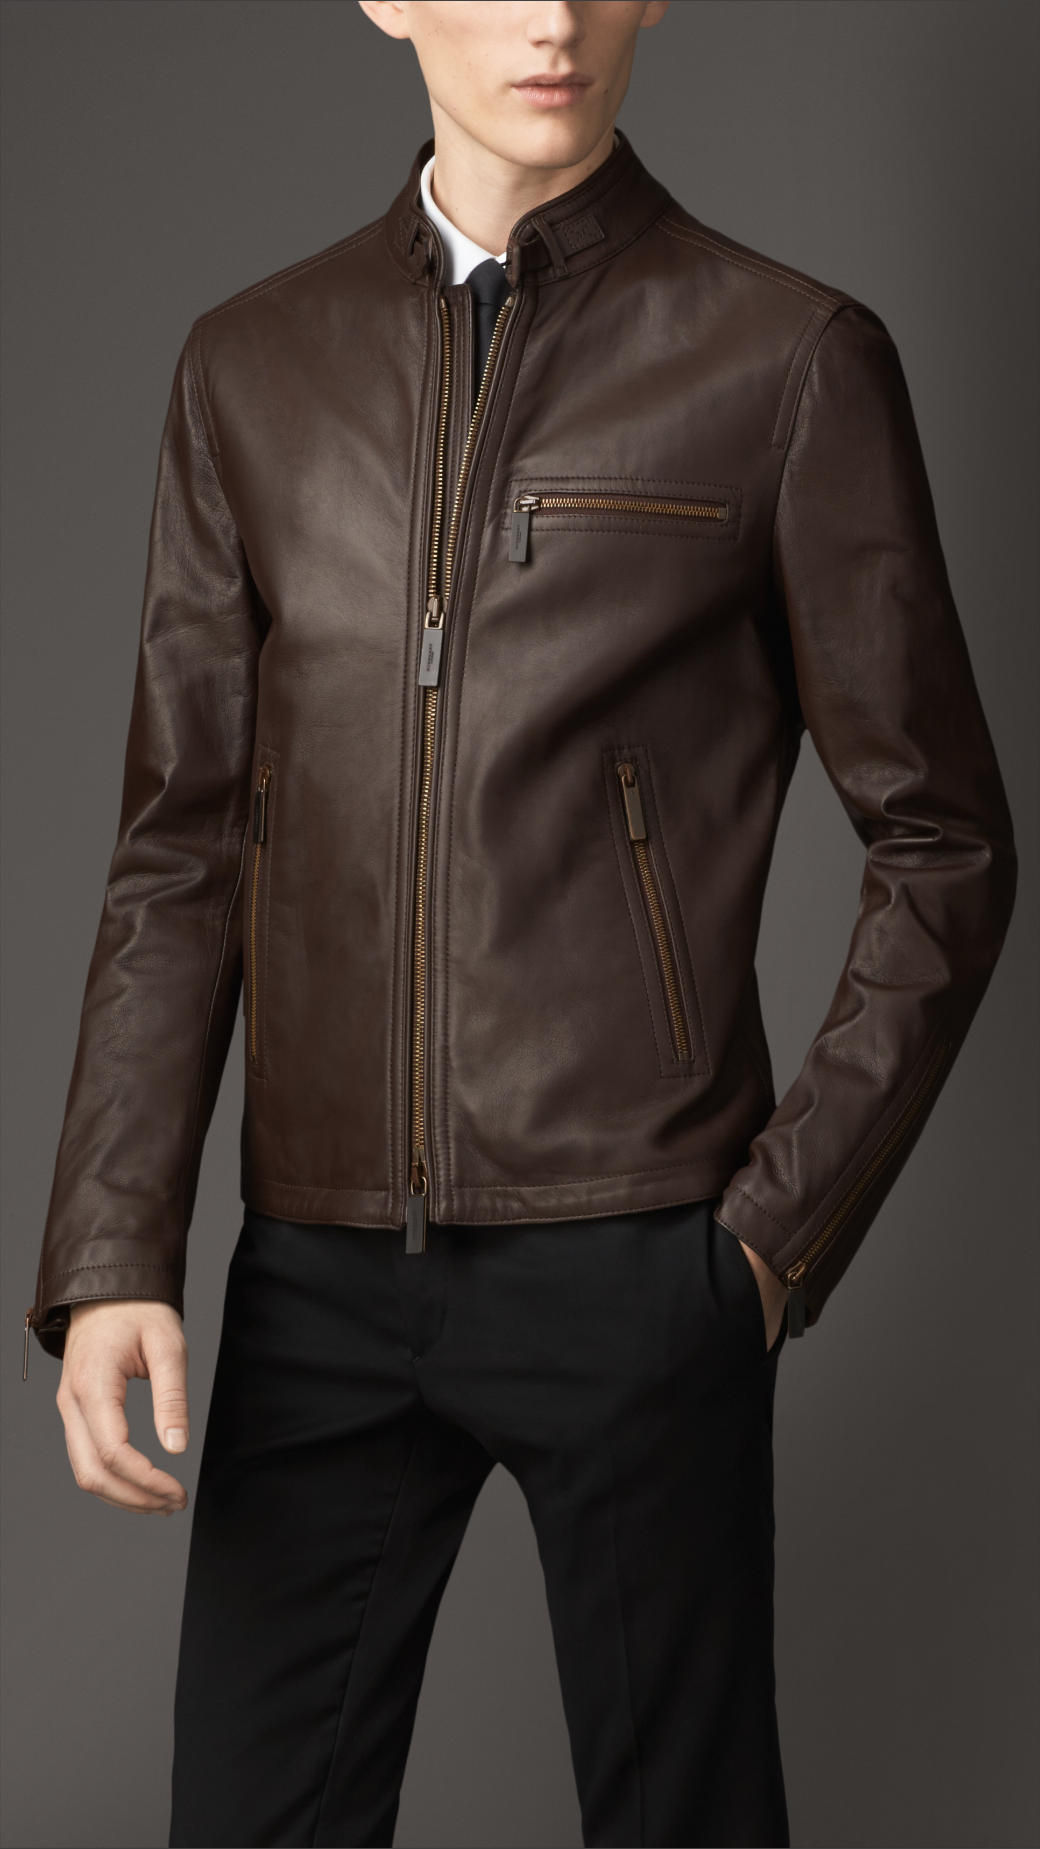 Lyst - Burberry Leather Racer Jacket in Brown for Men